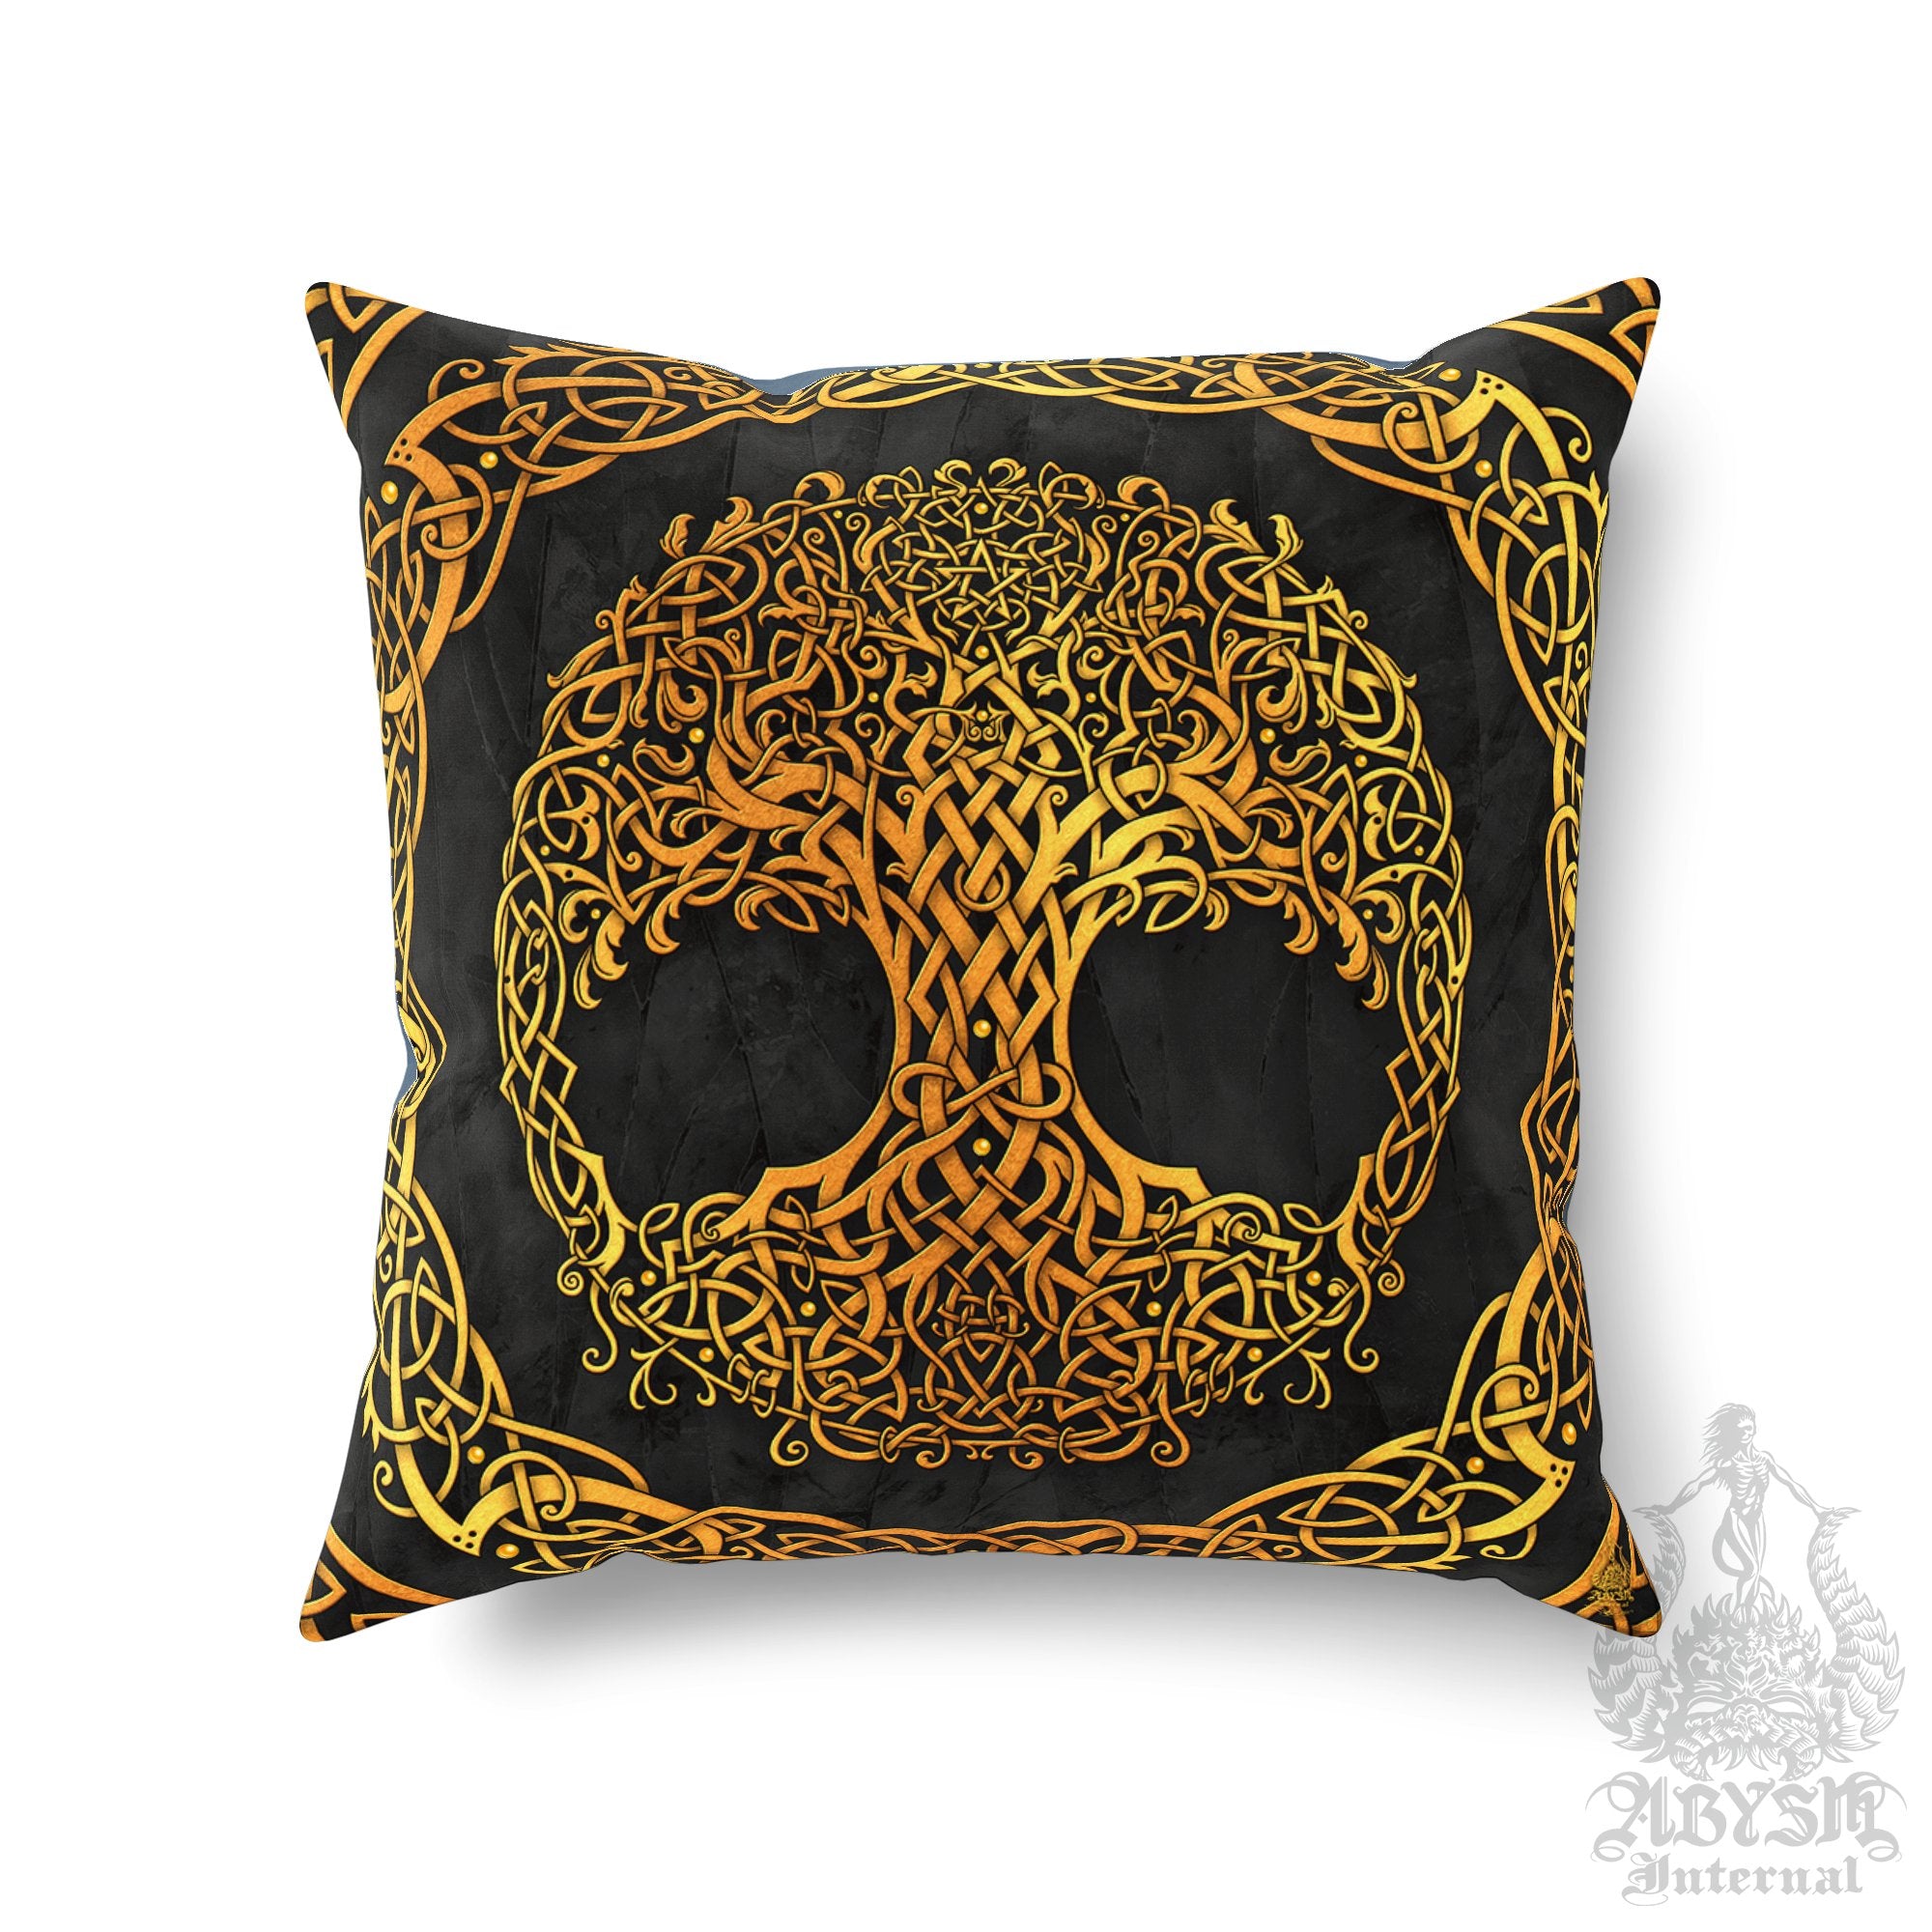 Celtic Throw Pillow, Decorative Accent Pillow, Square Cushion Cover, Tree of Life, Pagan Room Decor, Witchy Art, Eclectic Home - Gold & 3 Colors - Abysm Internal